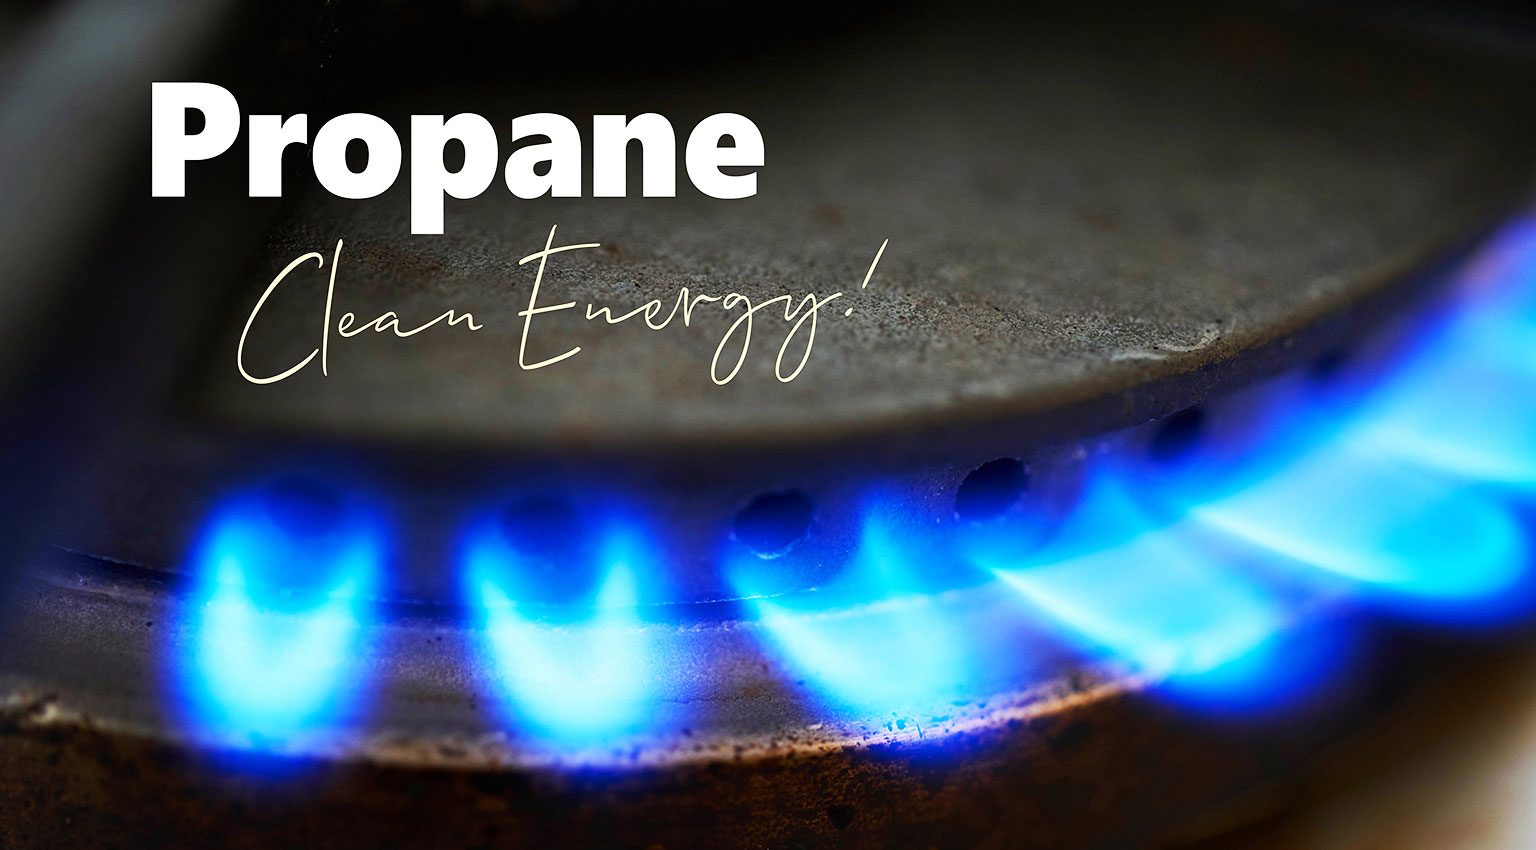 A close up of a gas stove with blue flame